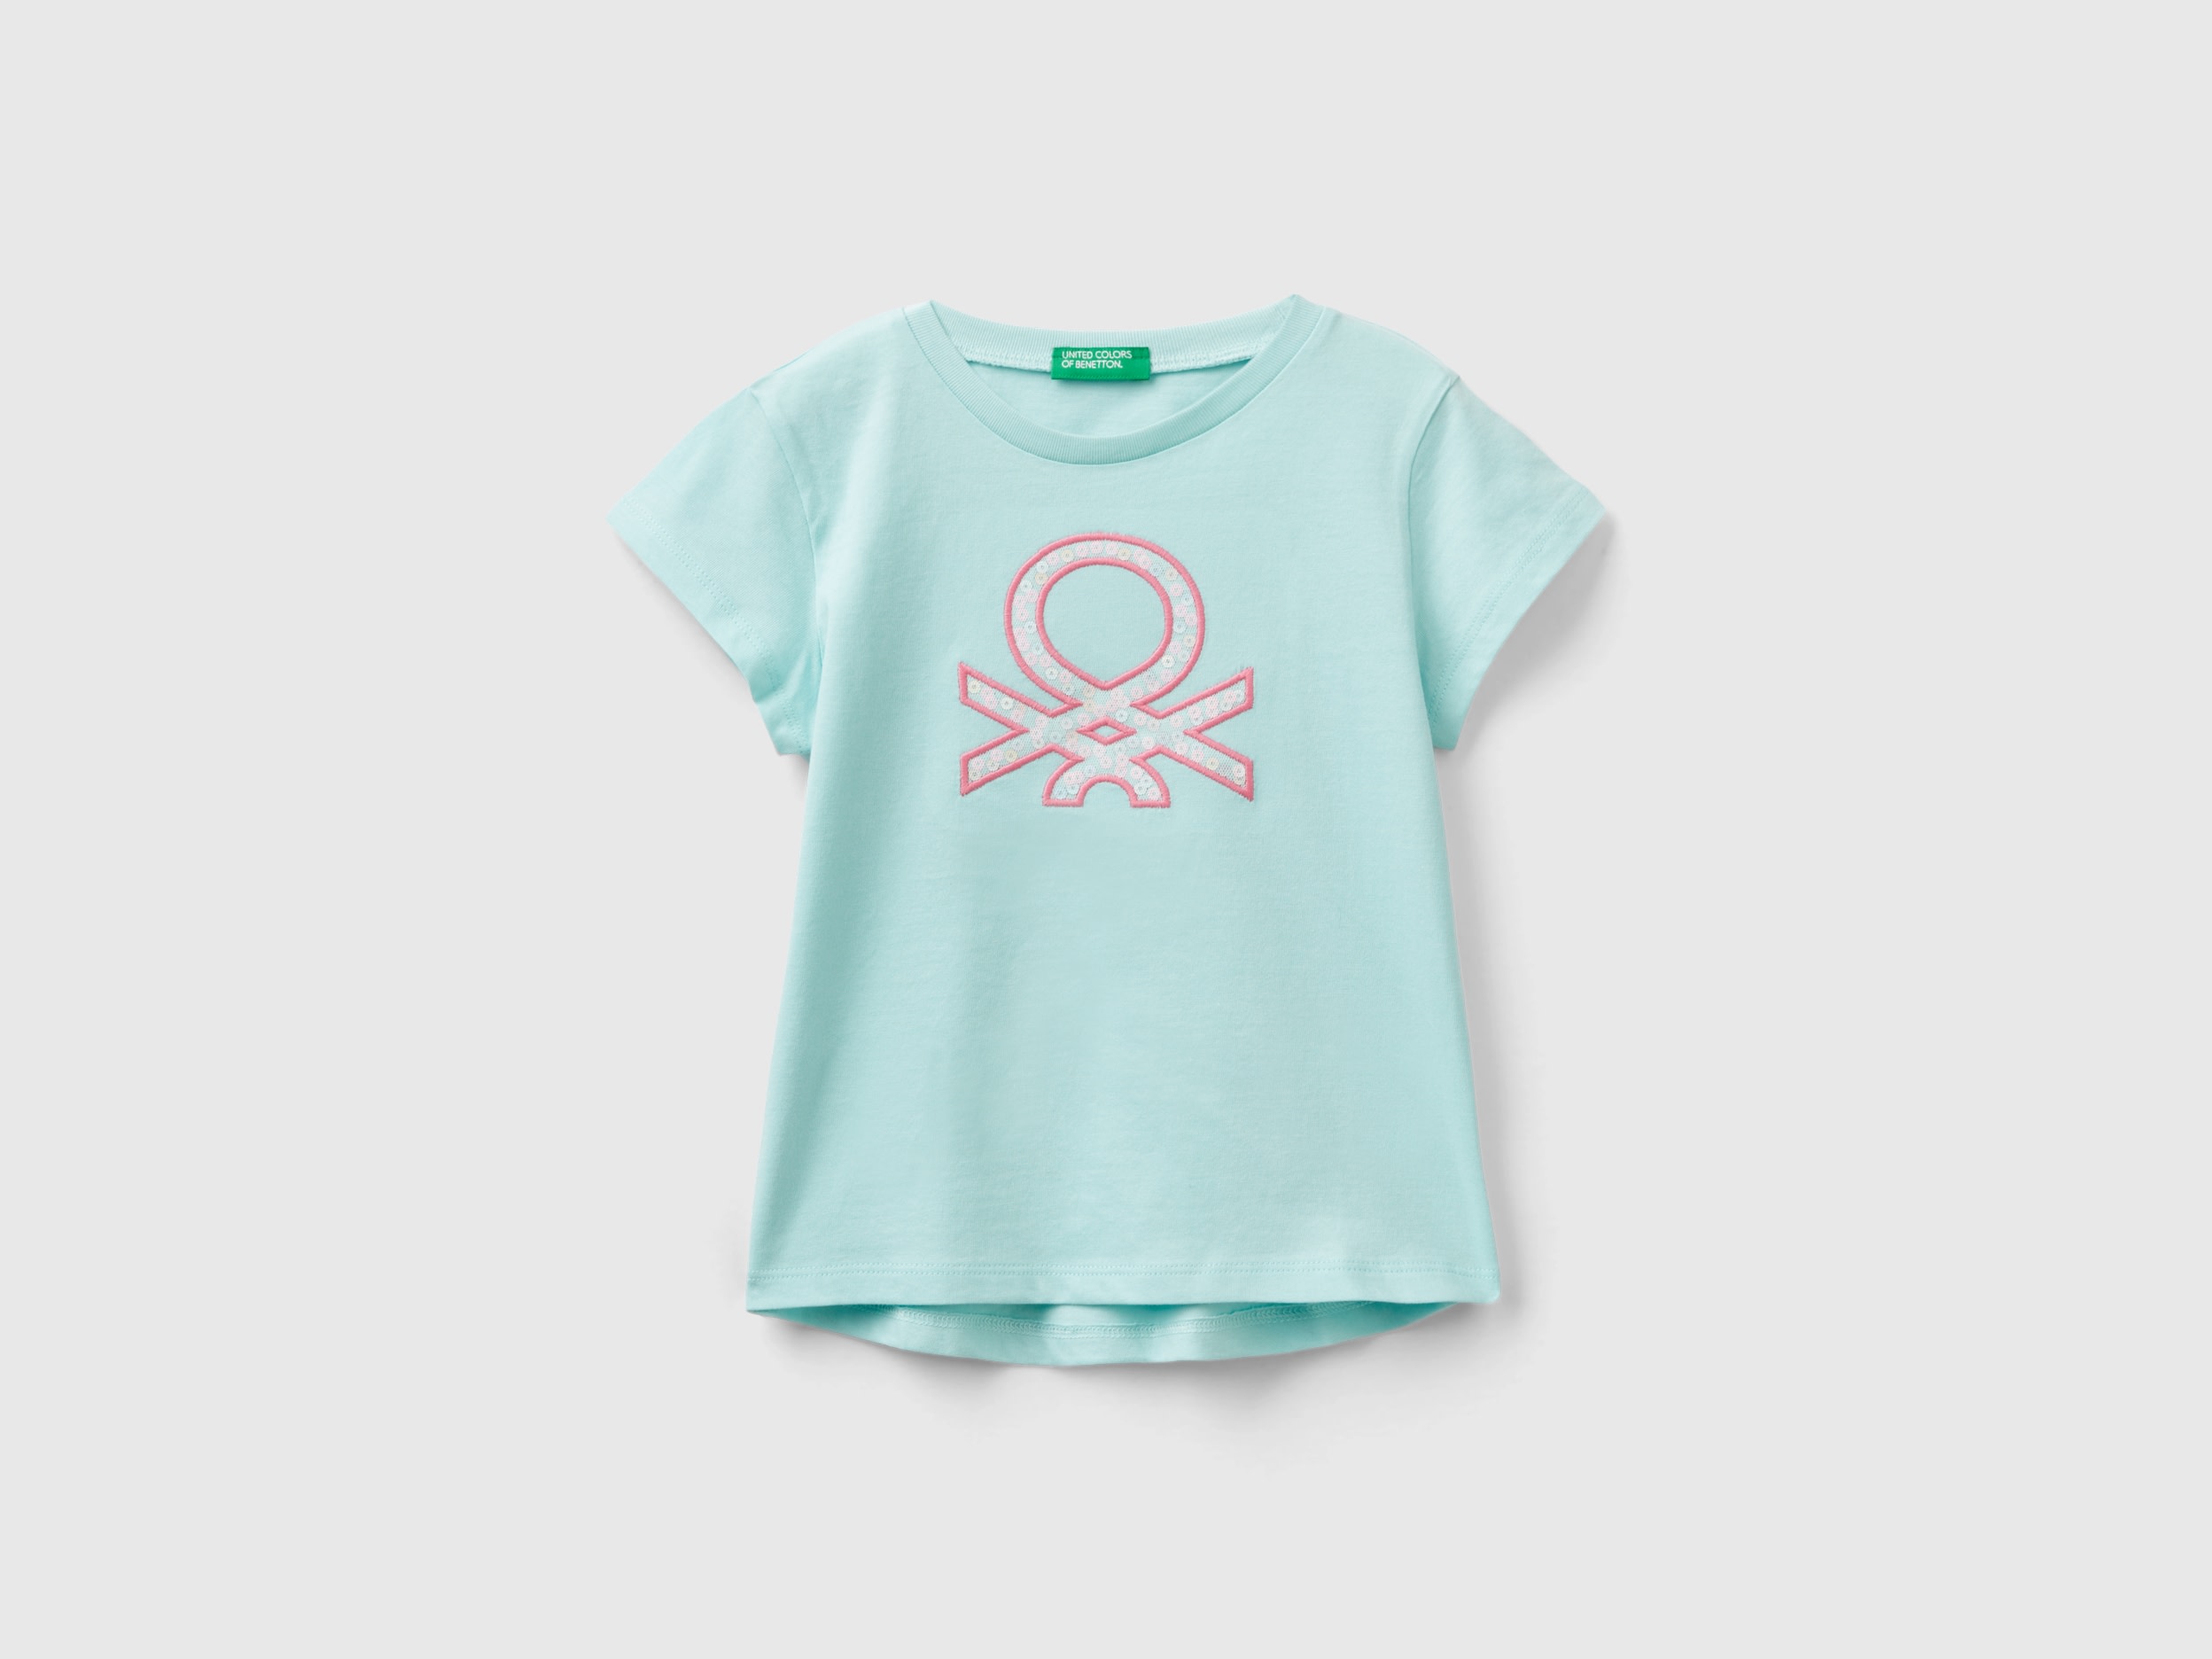 Image of Benetton, T-shirt In Organic Cotton With Embroidered Logo, size 82, Aqua, Kids